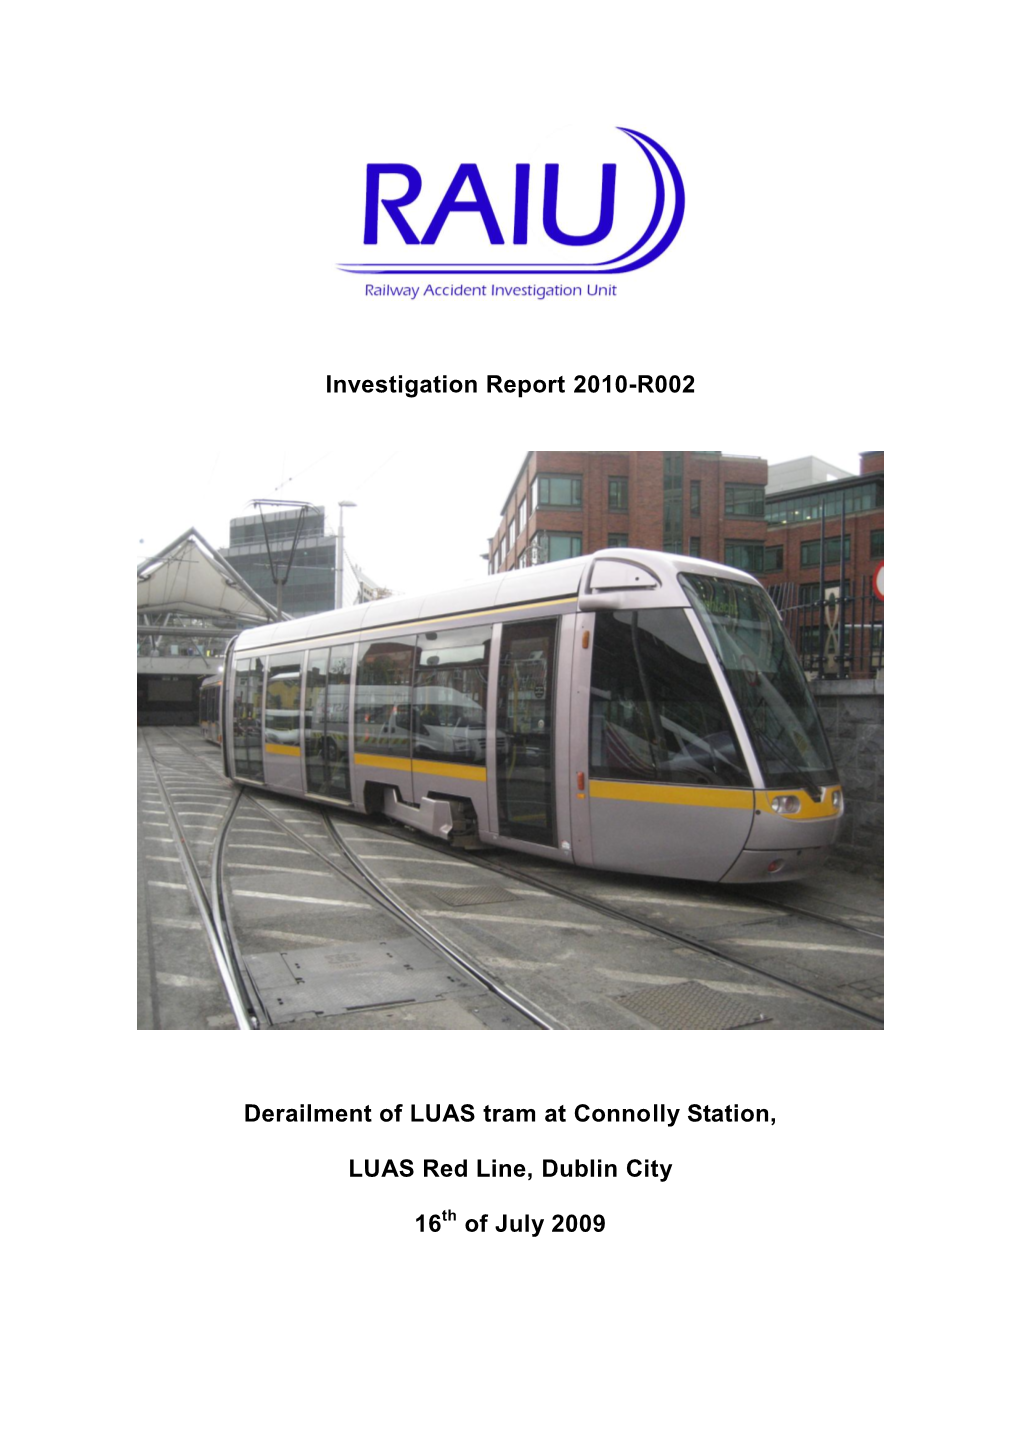 Investigation Report 2010-R002 Derailment of LUAS Tram at Connolly Station, LUAS Red Line, Dublin City